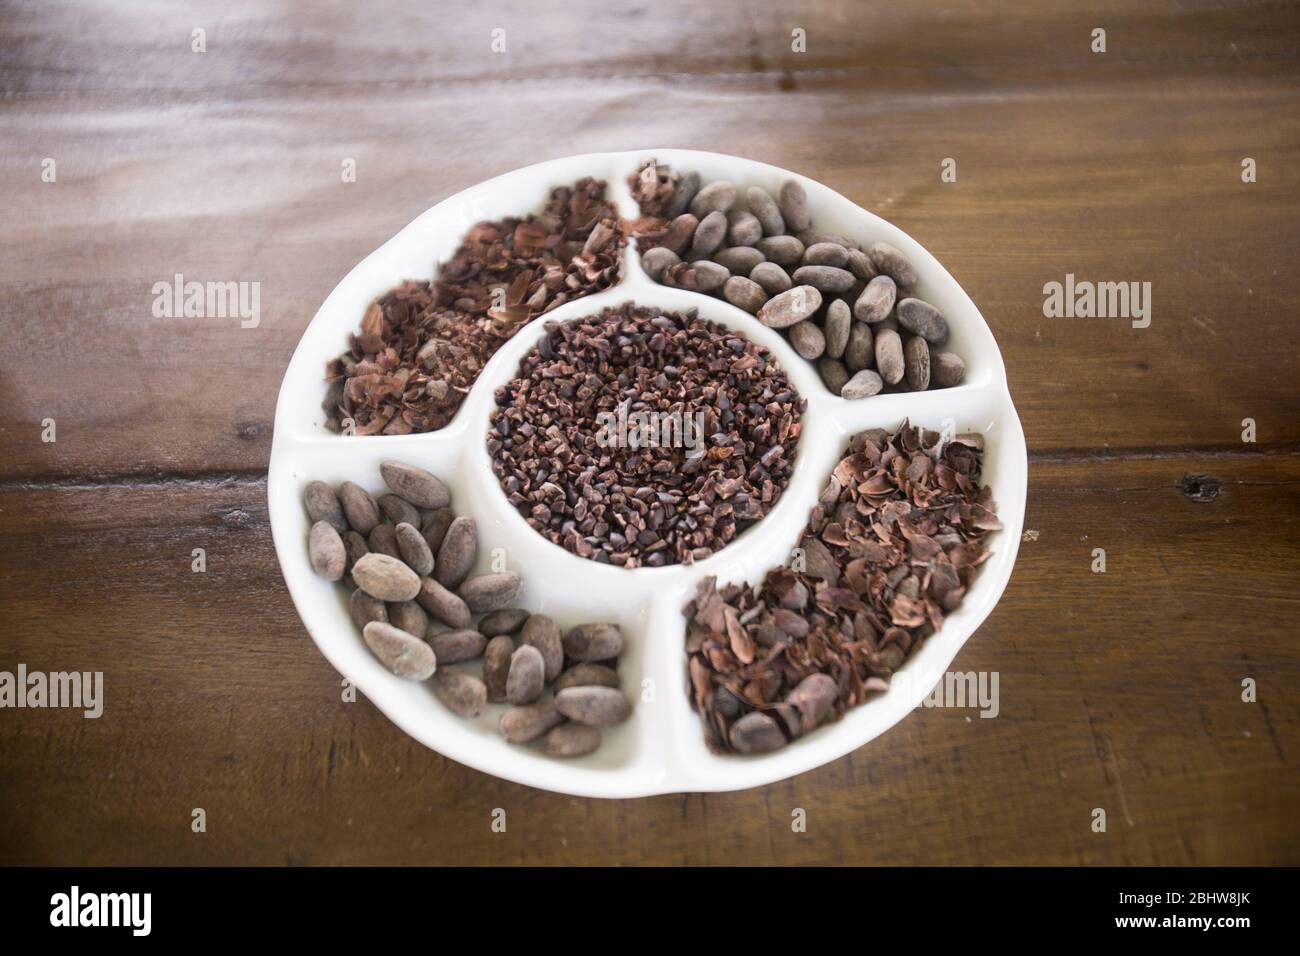 Raw Cacao Beans on a table Stock Photo